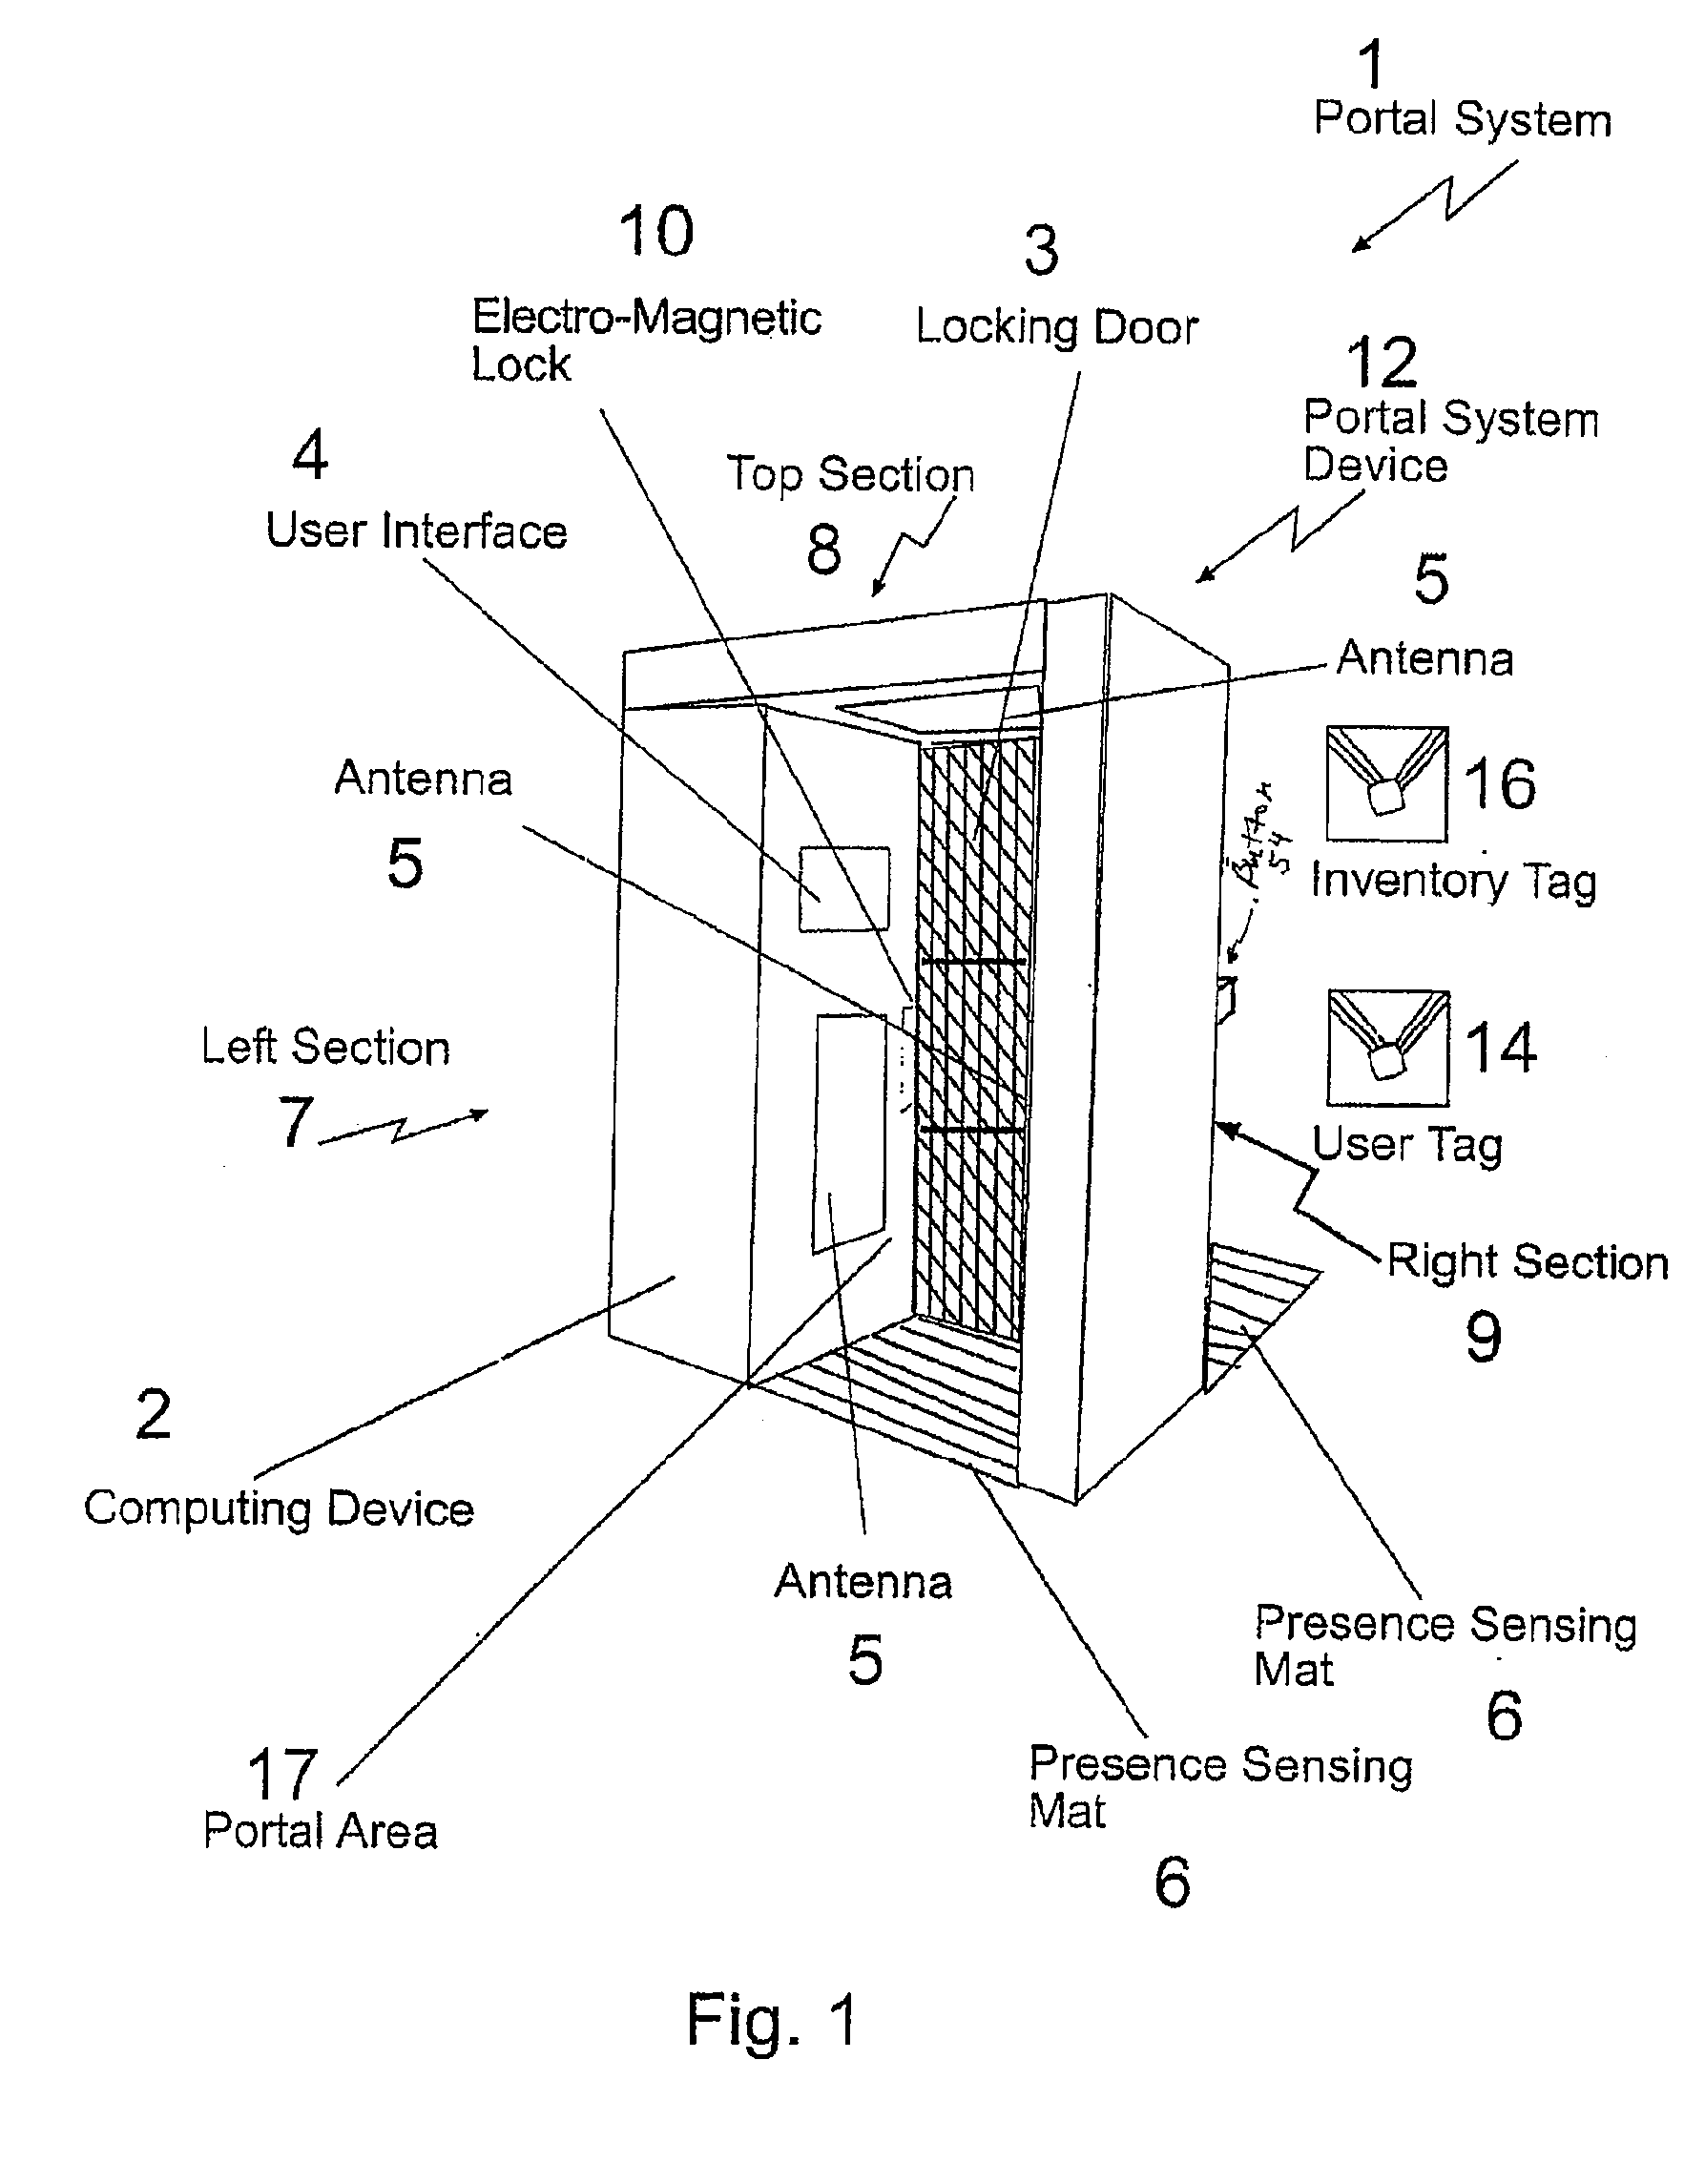 Portal System for a Controlled Space